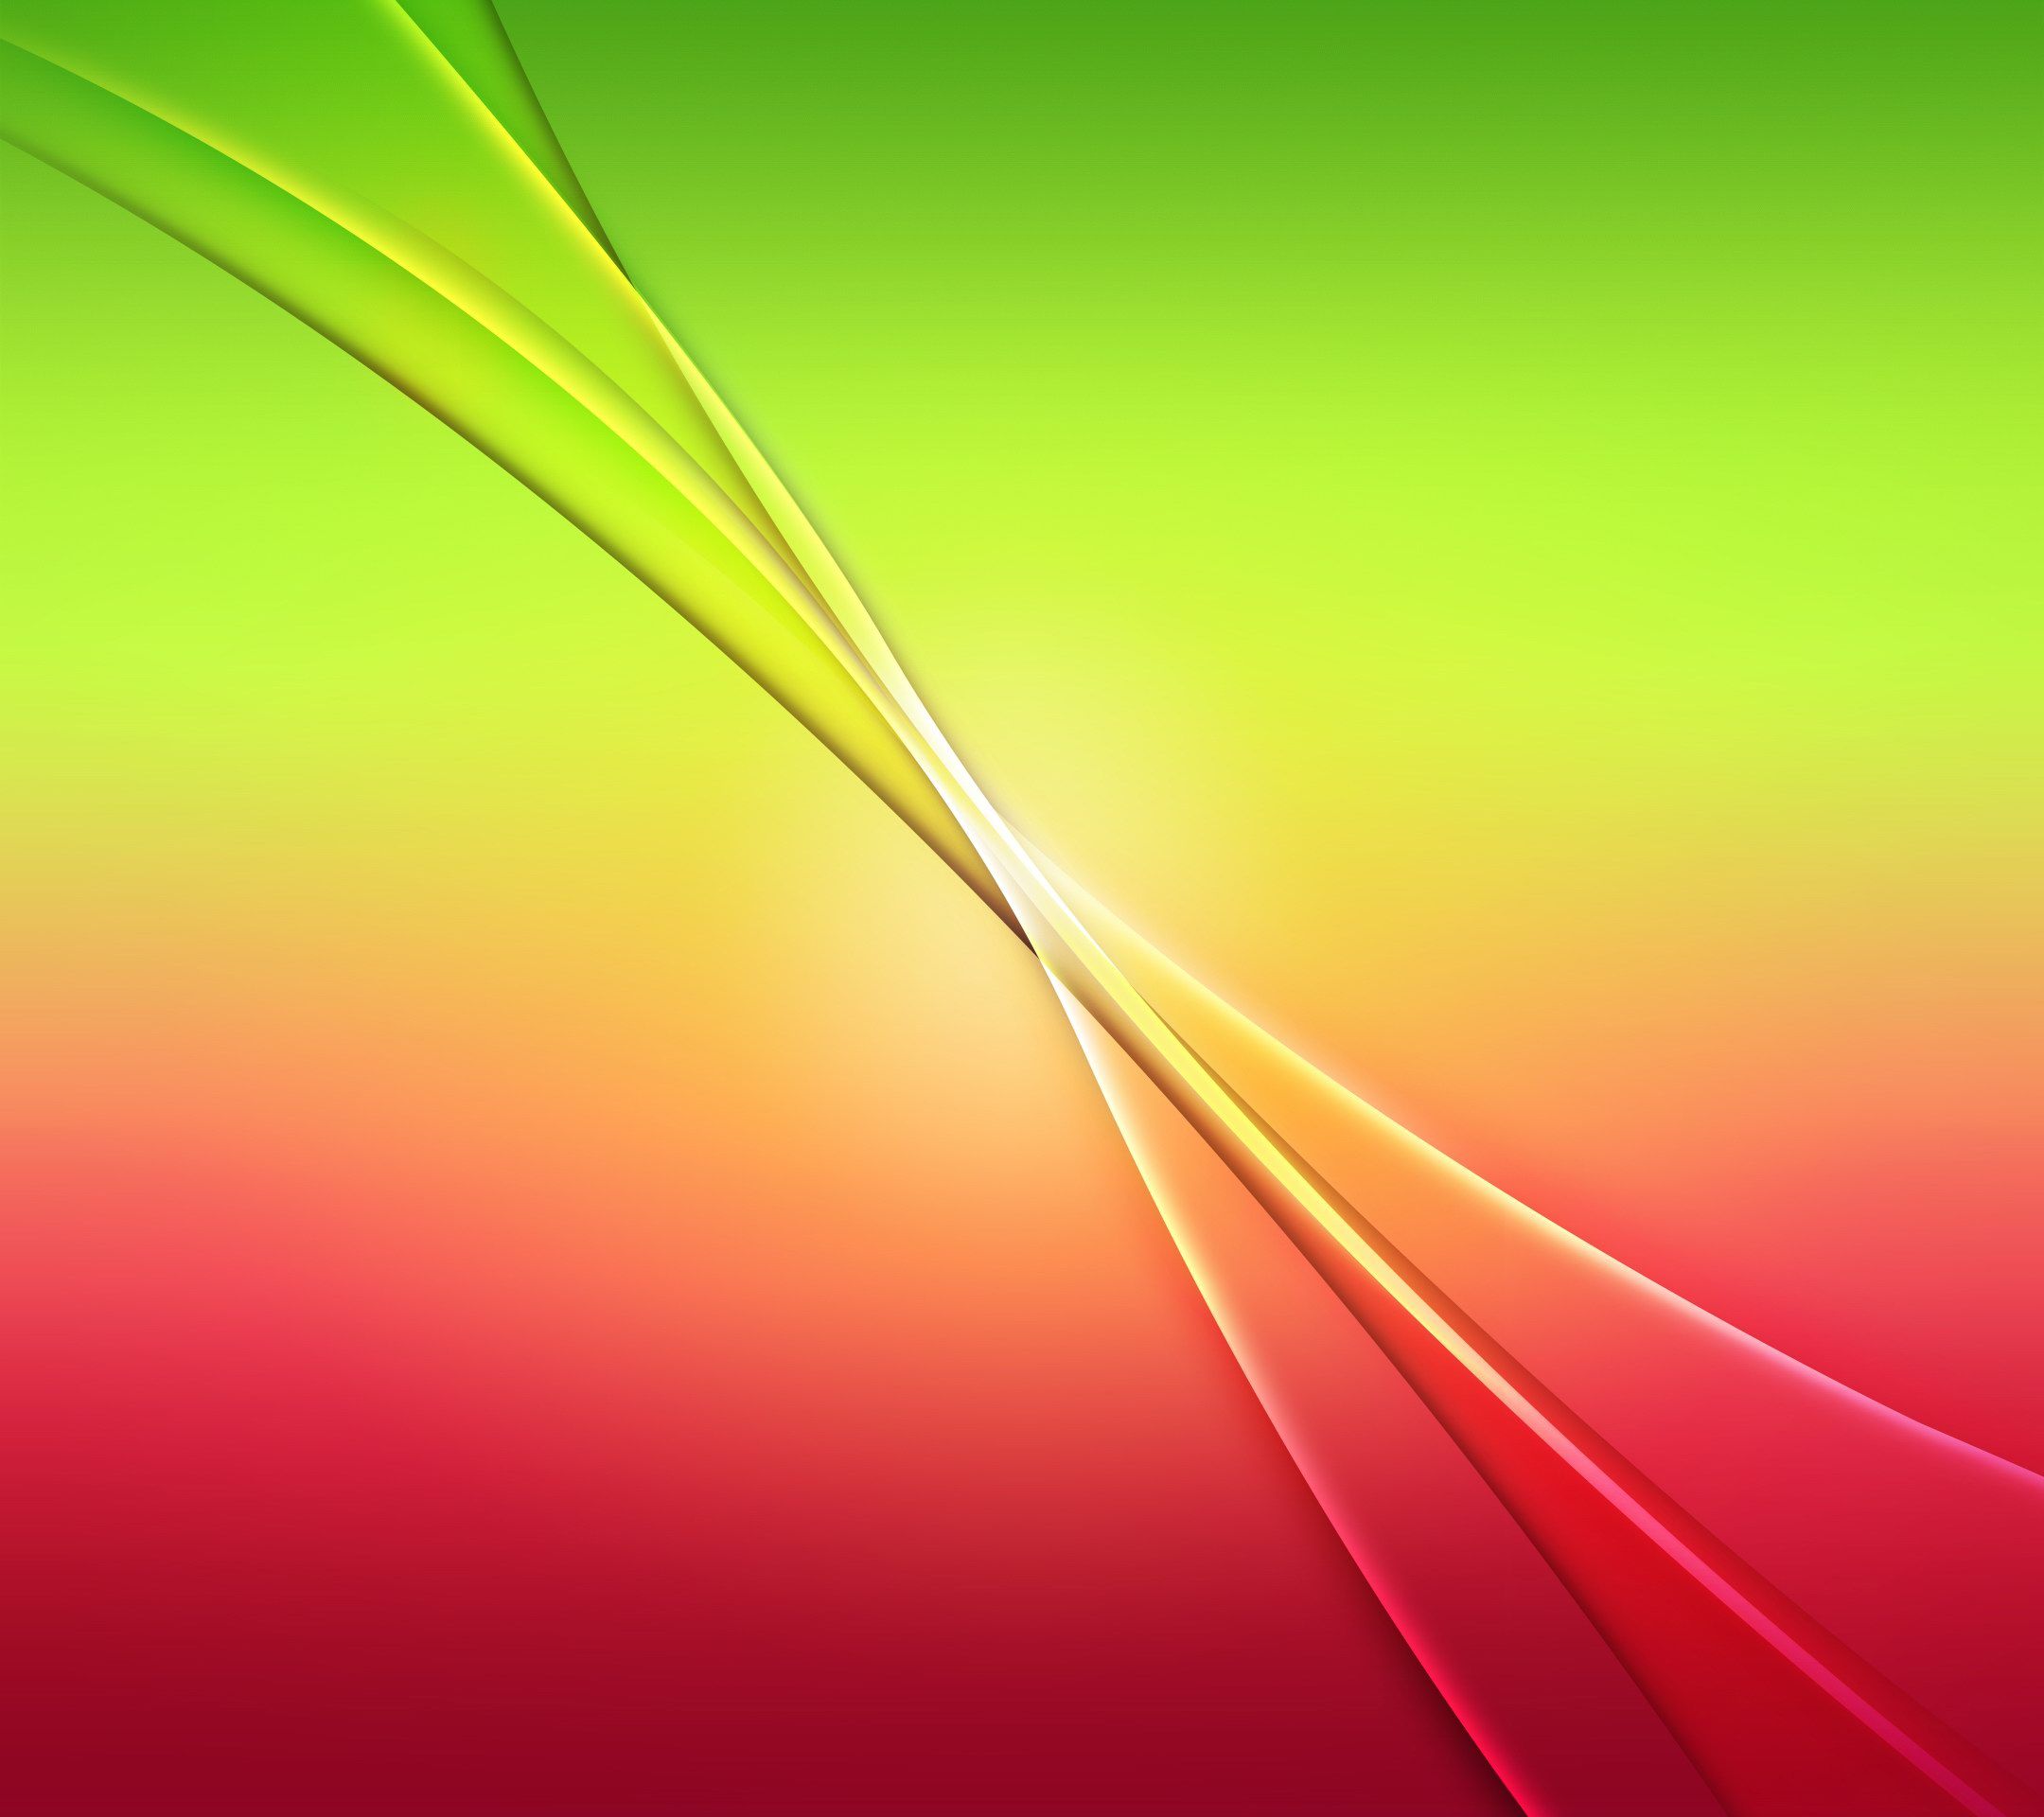 20 Best LG G Pro 2 Stock / Default HD Wallpapers For Android Devices